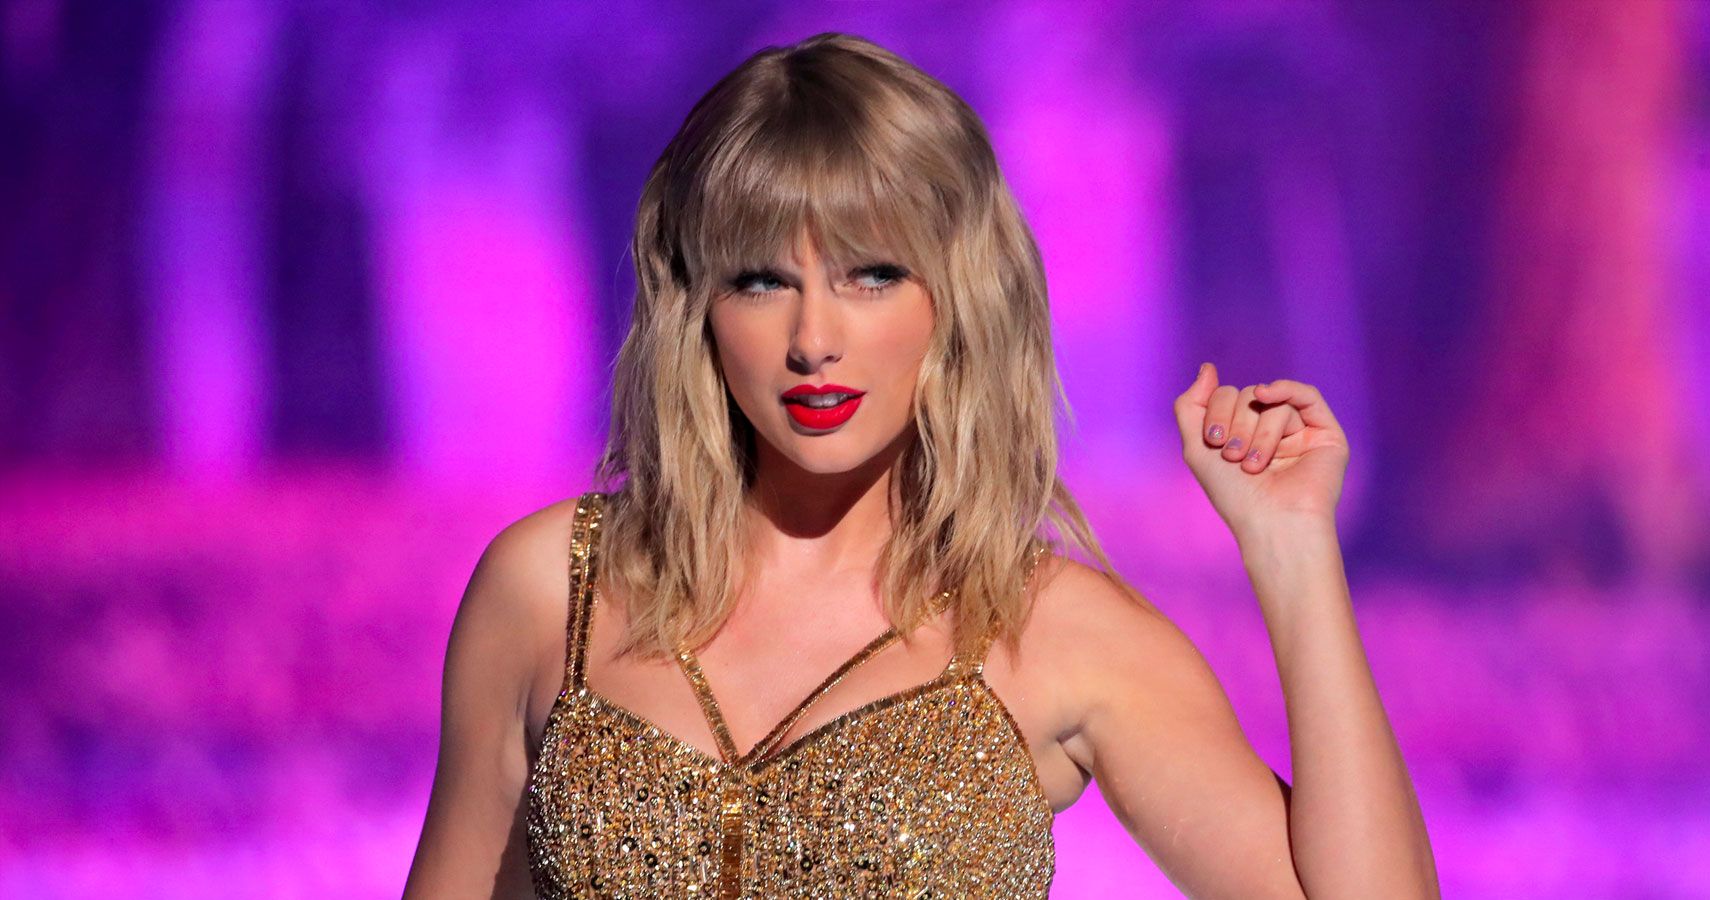 Here's Why Taylor Swift Is An Inspiration To Women